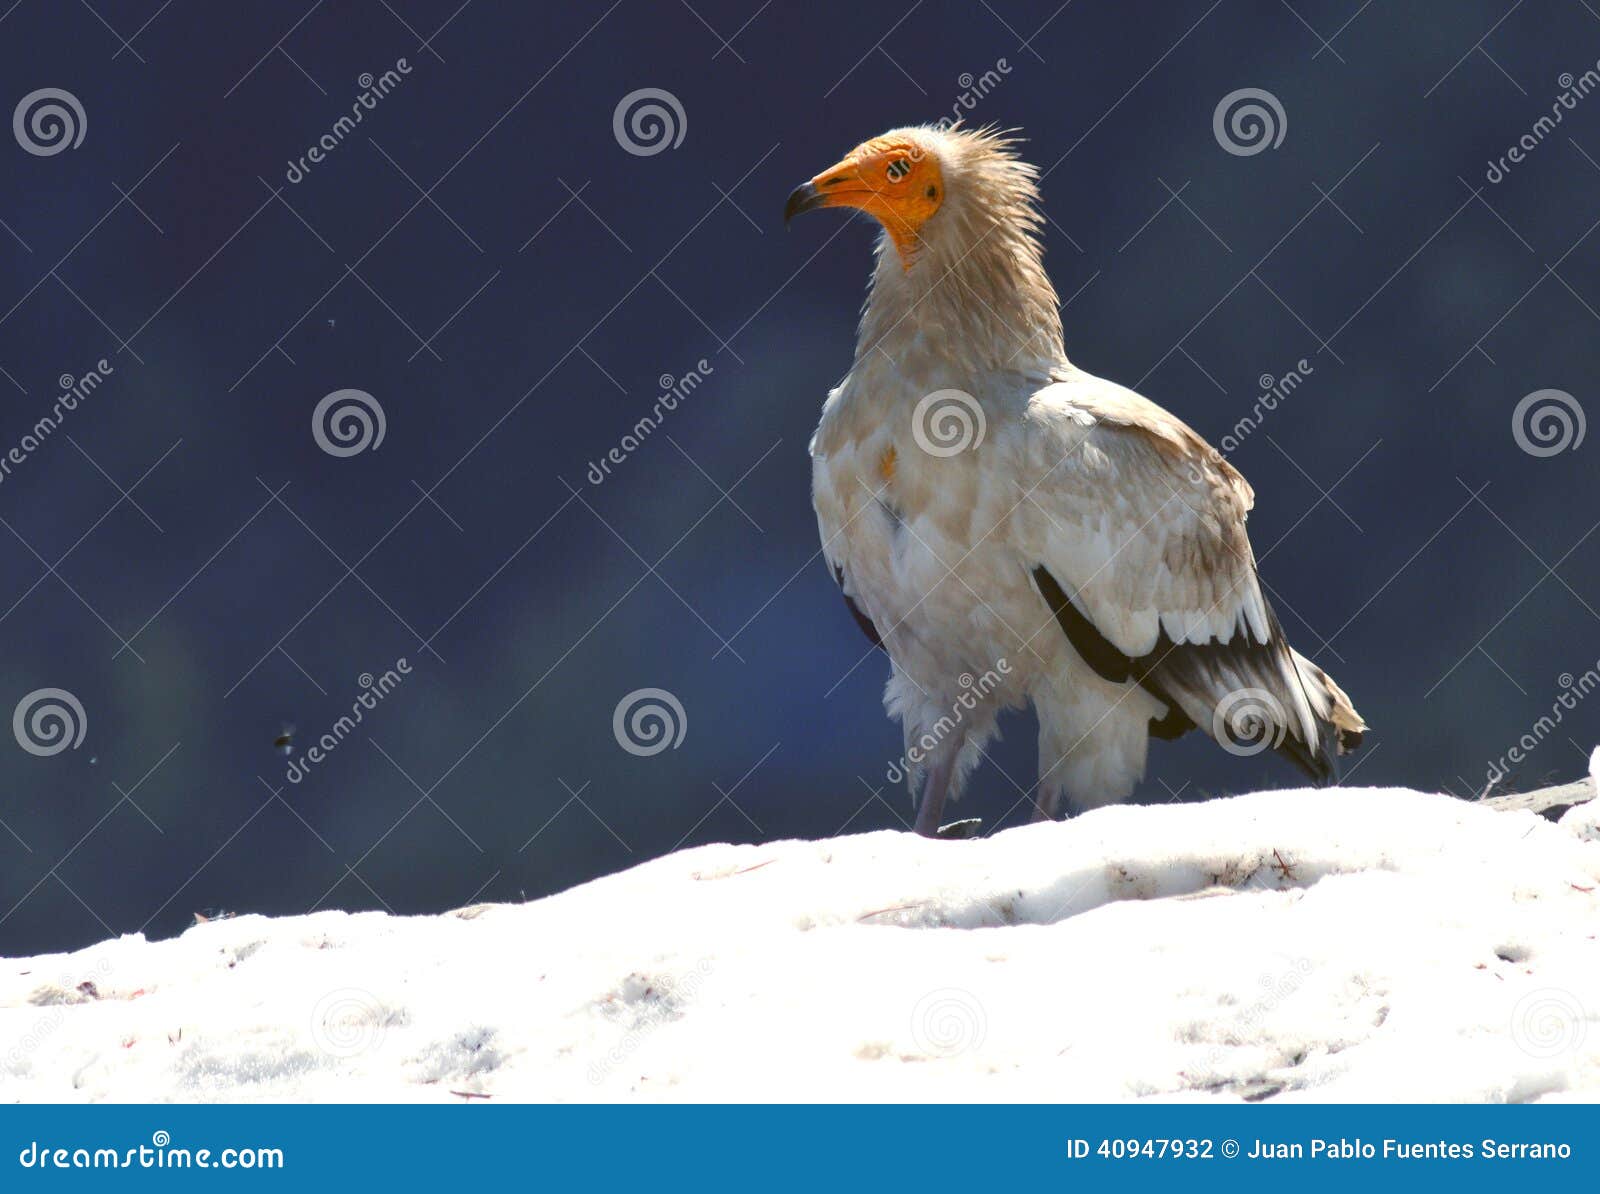 vulture perched in snow